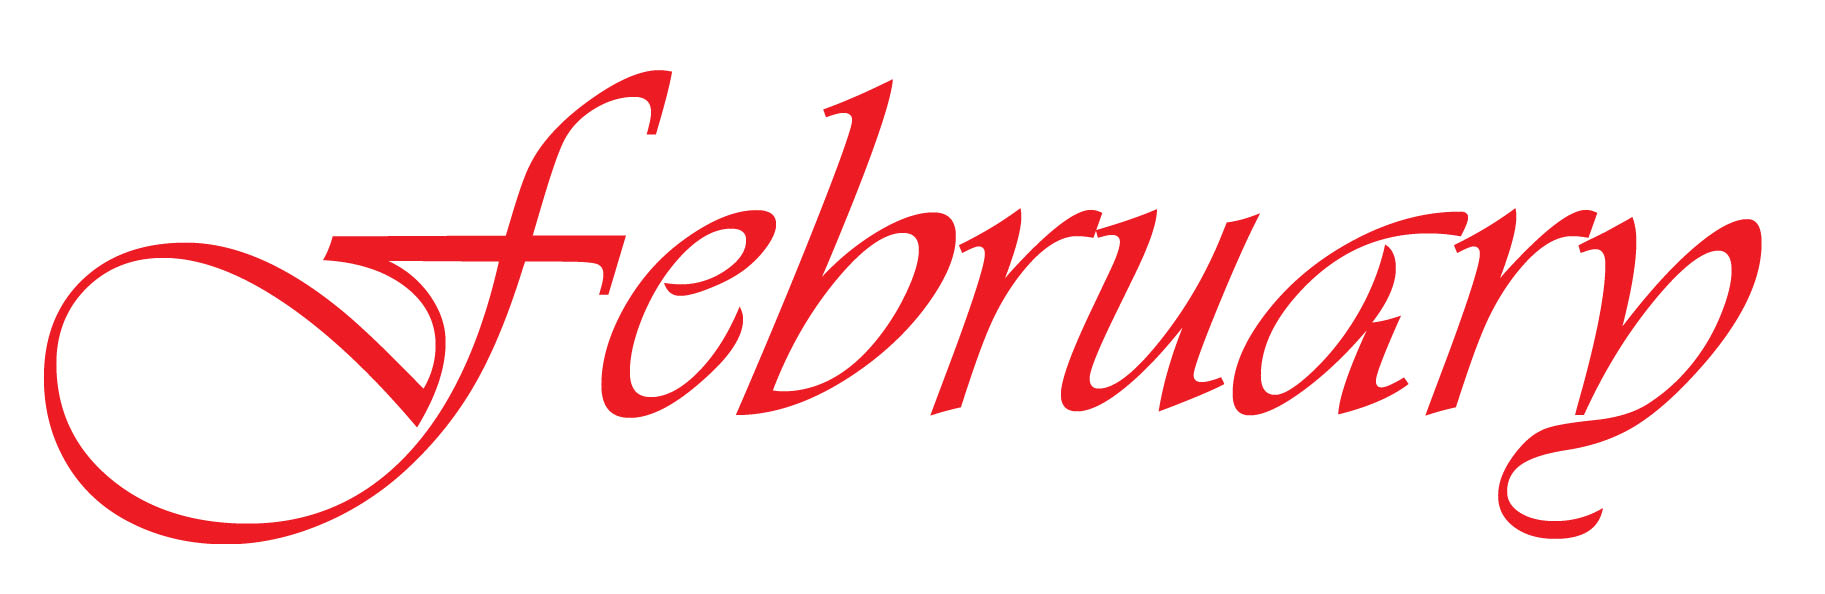 february clipart red